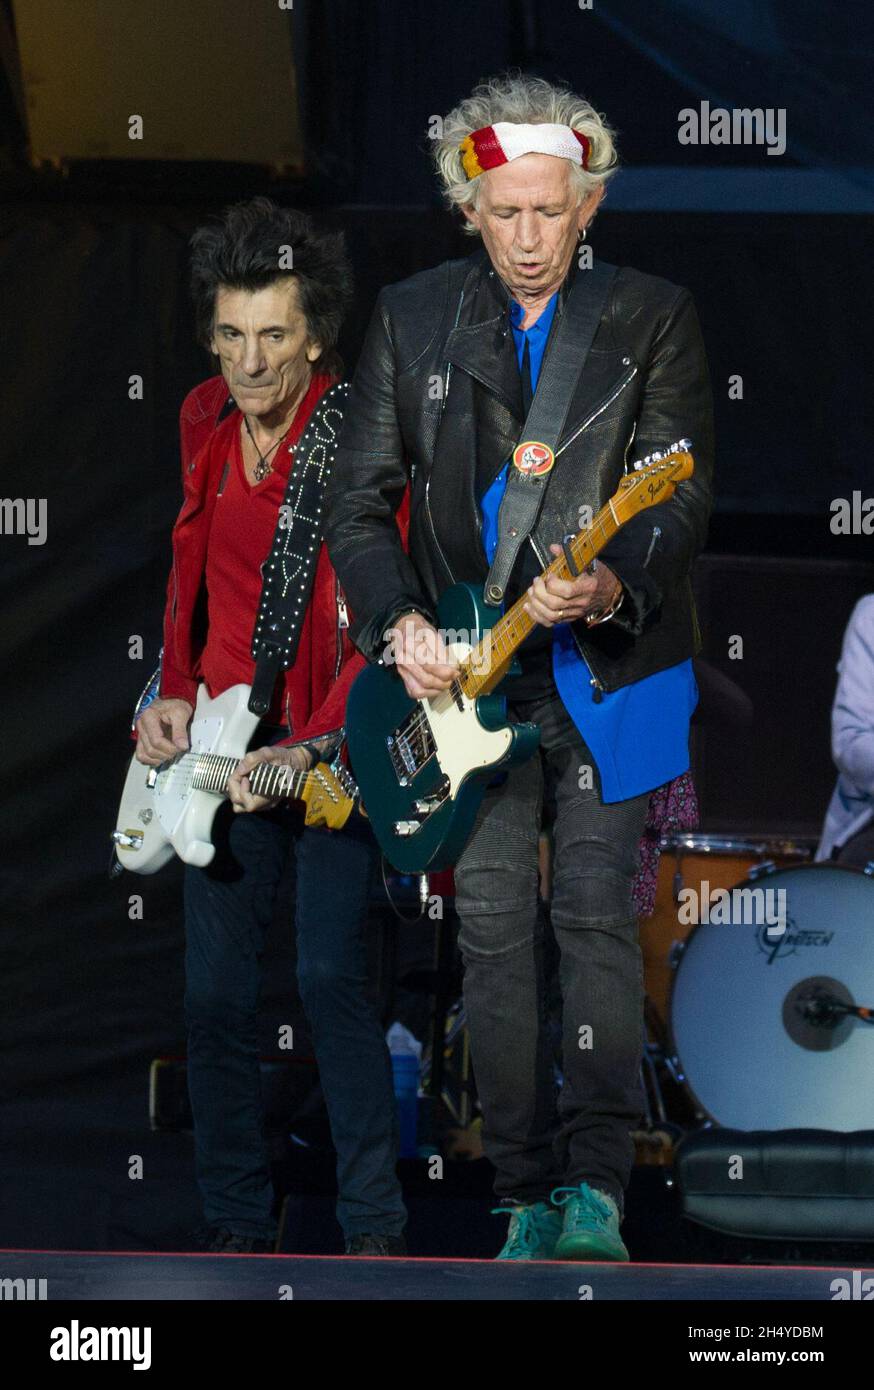 Keith Richards and Ronnie Wood of The Rolling Stones perform on stage at Ricoh Arena on June 02, 2018 in Coventry, England. Picture date: Saturday 02 June, 2018. Photo credit: Katja Ogrin/ EMPICS Entertainment. Stock Photo